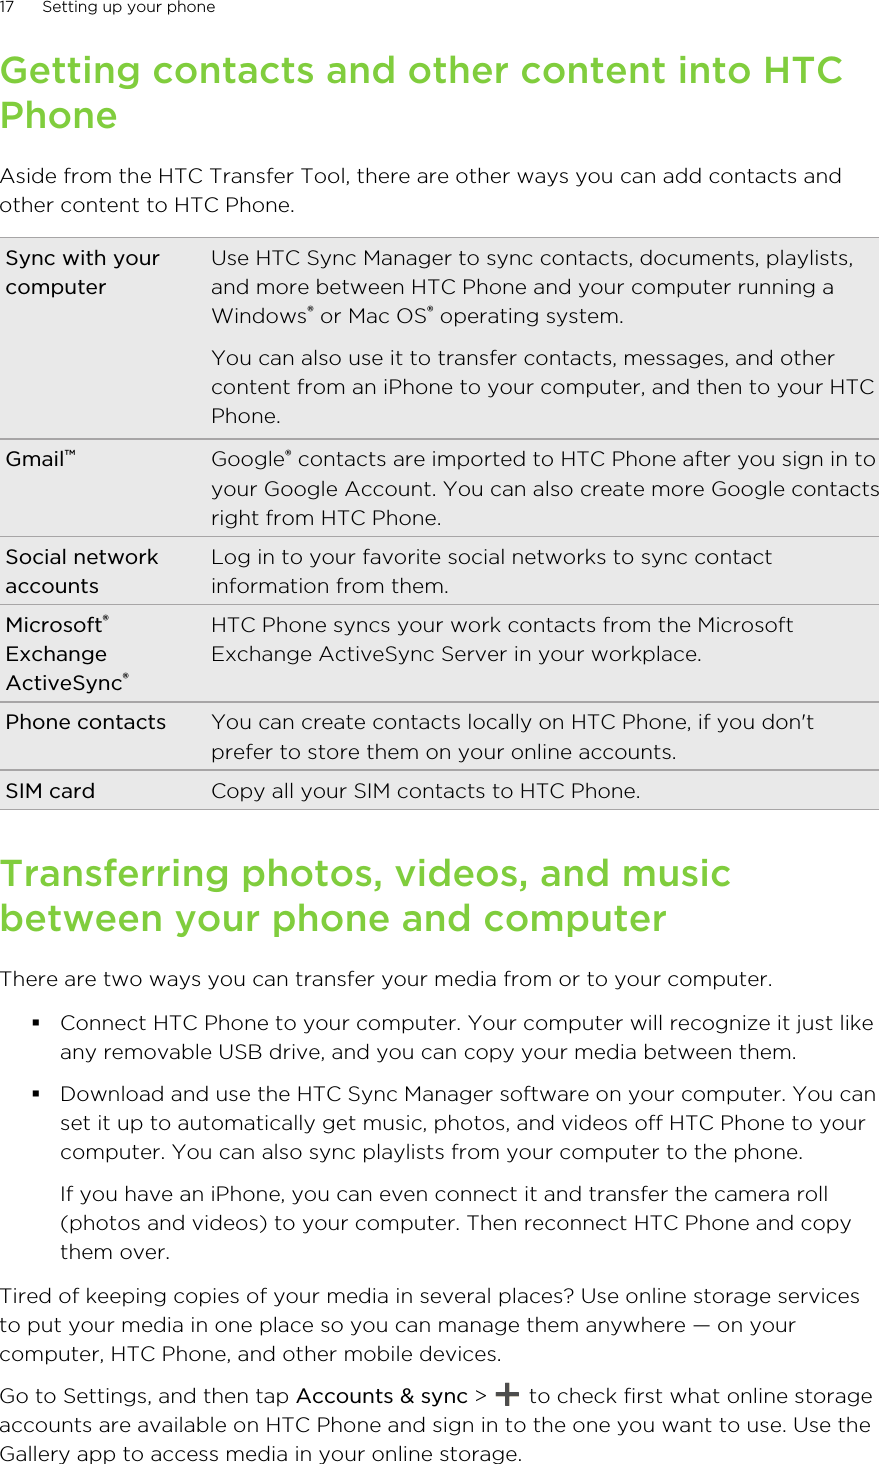 Getting contacts and other content into HTCPhoneAside from the HTC Transfer Tool, there are other ways you can add contacts andother content to HTC Phone.Sync with yourcomputerUse HTC Sync Manager to sync contacts, documents, playlists,and more between HTC Phone and your computer running aWindows® or Mac OS® operating system.You can also use it to transfer contacts, messages, and othercontent from an iPhone to your computer, and then to your HTCPhone.Gmail™Google® contacts are imported to HTC Phone after you sign in toyour Google Account. You can also create more Google contactsright from HTC Phone.Social networkaccountsLog in to your favorite social networks to sync contactinformation from them.Microsoft®ExchangeActiveSync®HTC Phone syncs your work contacts from the MicrosoftExchange ActiveSync Server in your workplace.Phone contacts You can create contacts locally on HTC Phone, if you don&apos;tprefer to store them on your online accounts.SIM card Copy all your SIM contacts to HTC Phone.Transferring photos, videos, and musicbetween your phone and computerThere are two ways you can transfer your media from or to your computer.§Connect HTC Phone to your computer. Your computer will recognize it just likeany removable USB drive, and you can copy your media between them.§Download and use the HTC Sync Manager software on your computer. You canset it up to automatically get music, photos, and videos off HTC Phone to yourcomputer. You can also sync playlists from your computer to the phone.If you have an iPhone, you can even connect it and transfer the camera roll(photos and videos) to your computer. Then reconnect HTC Phone and copythem over.Tired of keeping copies of your media in several places? Use online storage servicesto put your media in one place so you can manage them anywhere — on yourcomputer, HTC Phone, and other mobile devices.Go to Settings, and then tap Accounts &amp; sync &gt;   to check first what online storageaccounts are available on HTC Phone and sign in to the one you want to use. Use theGallery app to access media in your online storage.17 Setting up your phoneHTC Confidential for Certification HTC Confidential for Certification